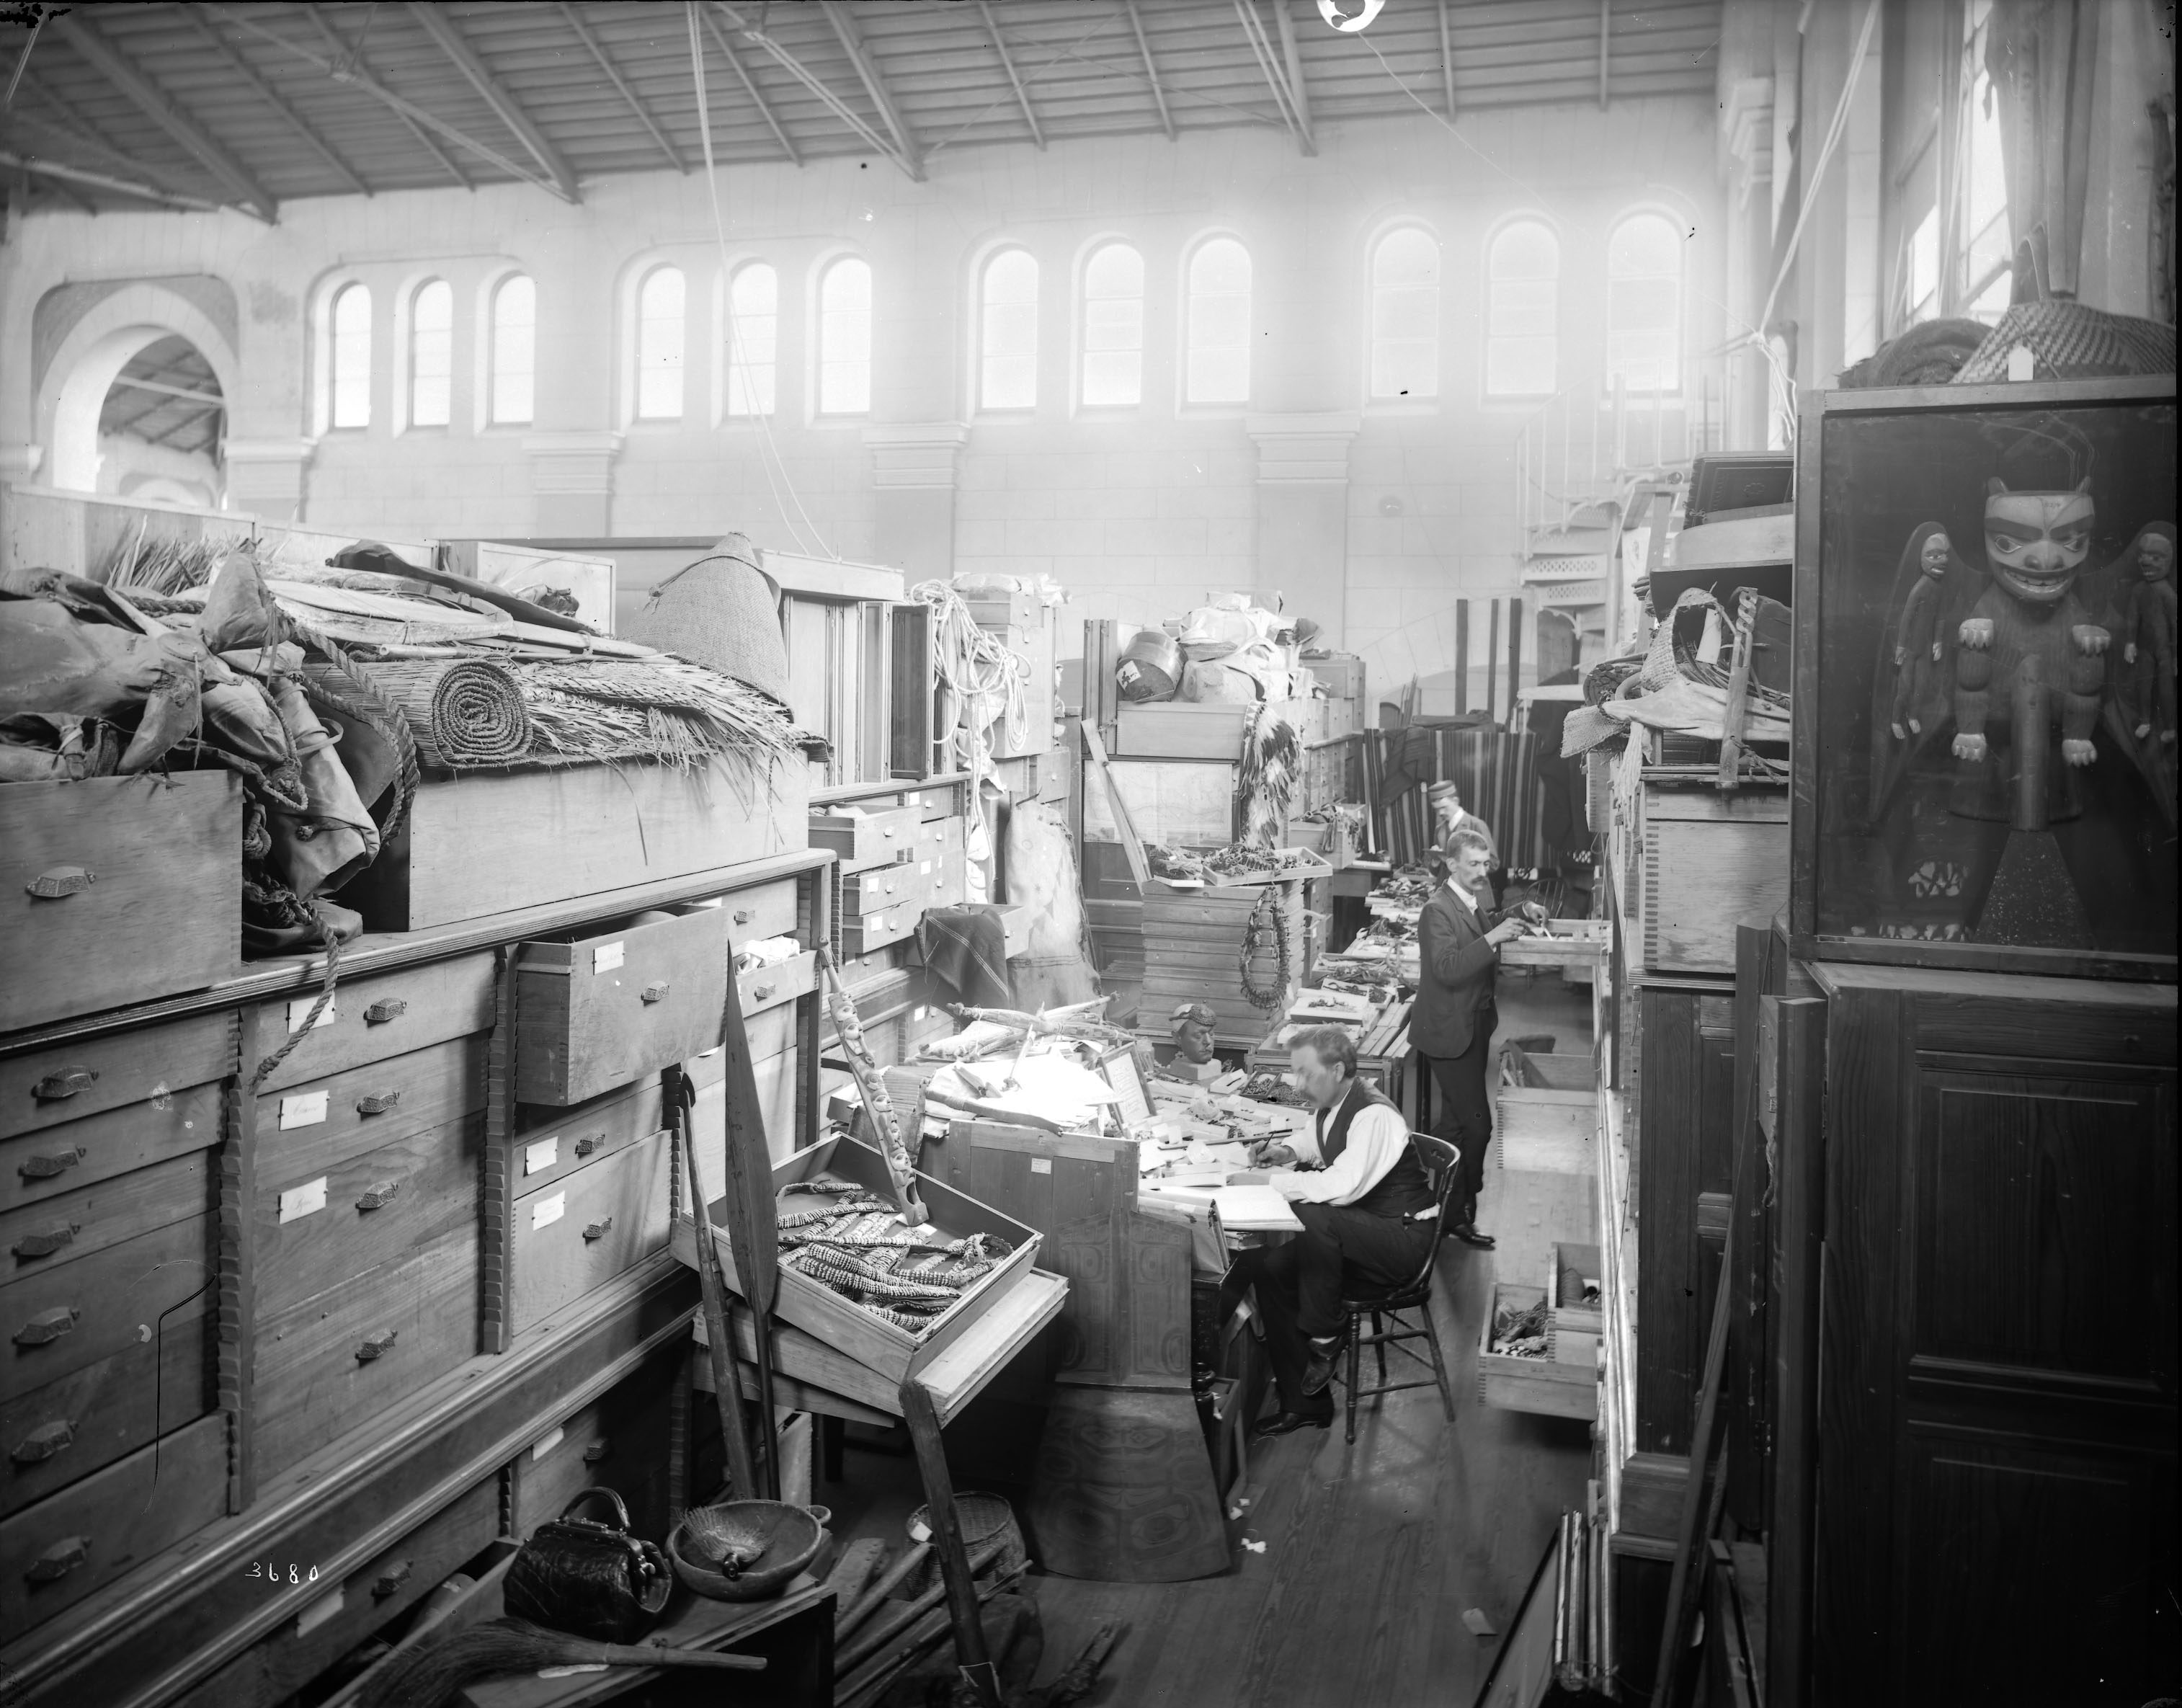 Two men working in a large room filled with boxes and crates